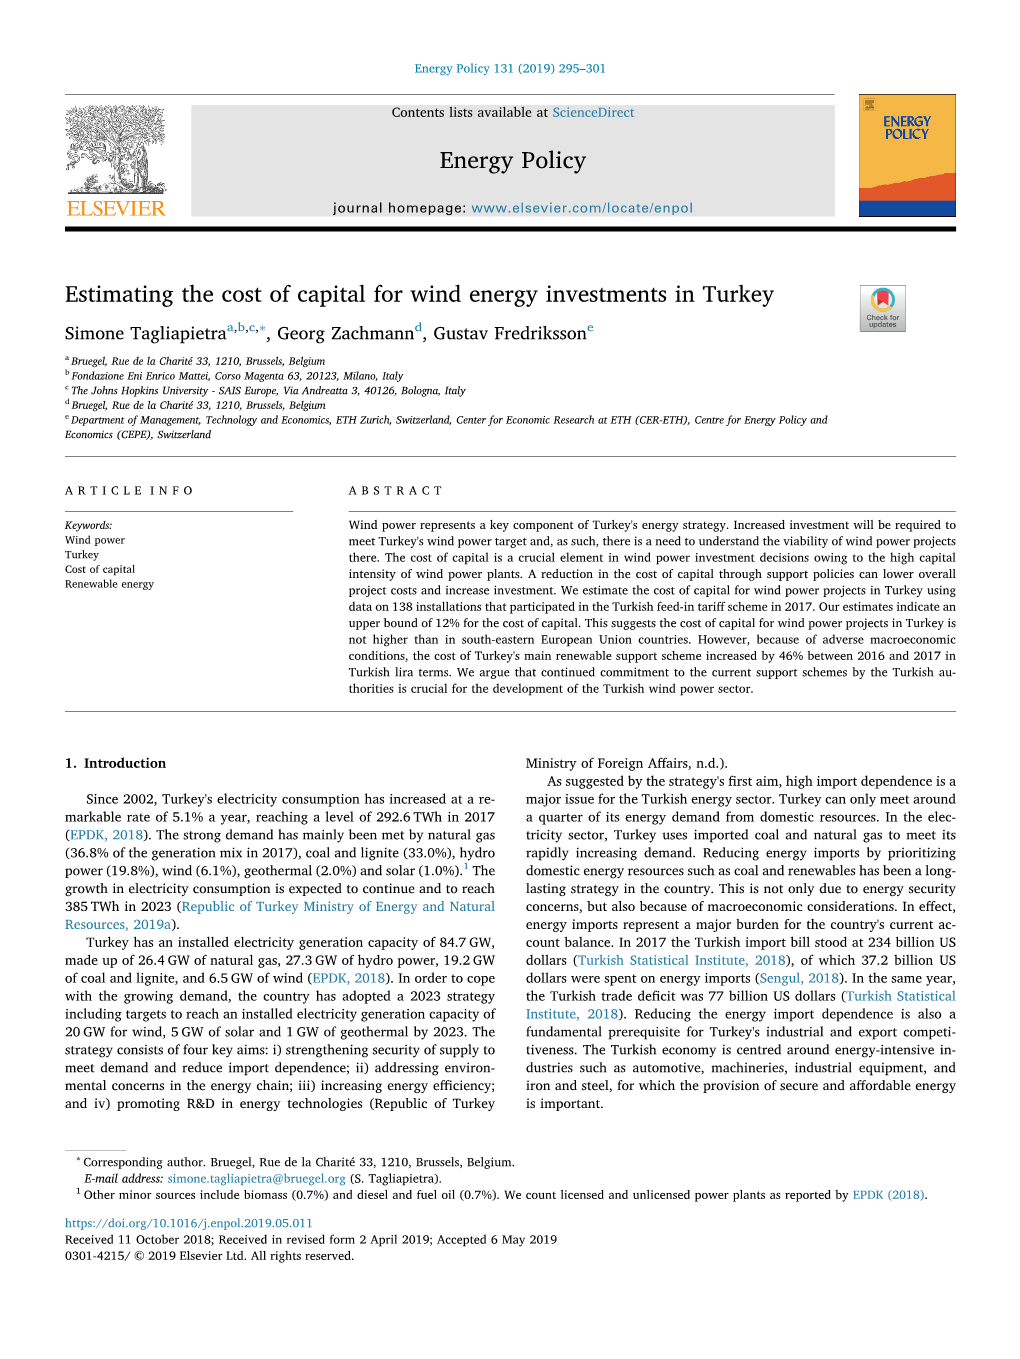 Estimating the Cost of Capital for Wind Energy Investments in Turkey